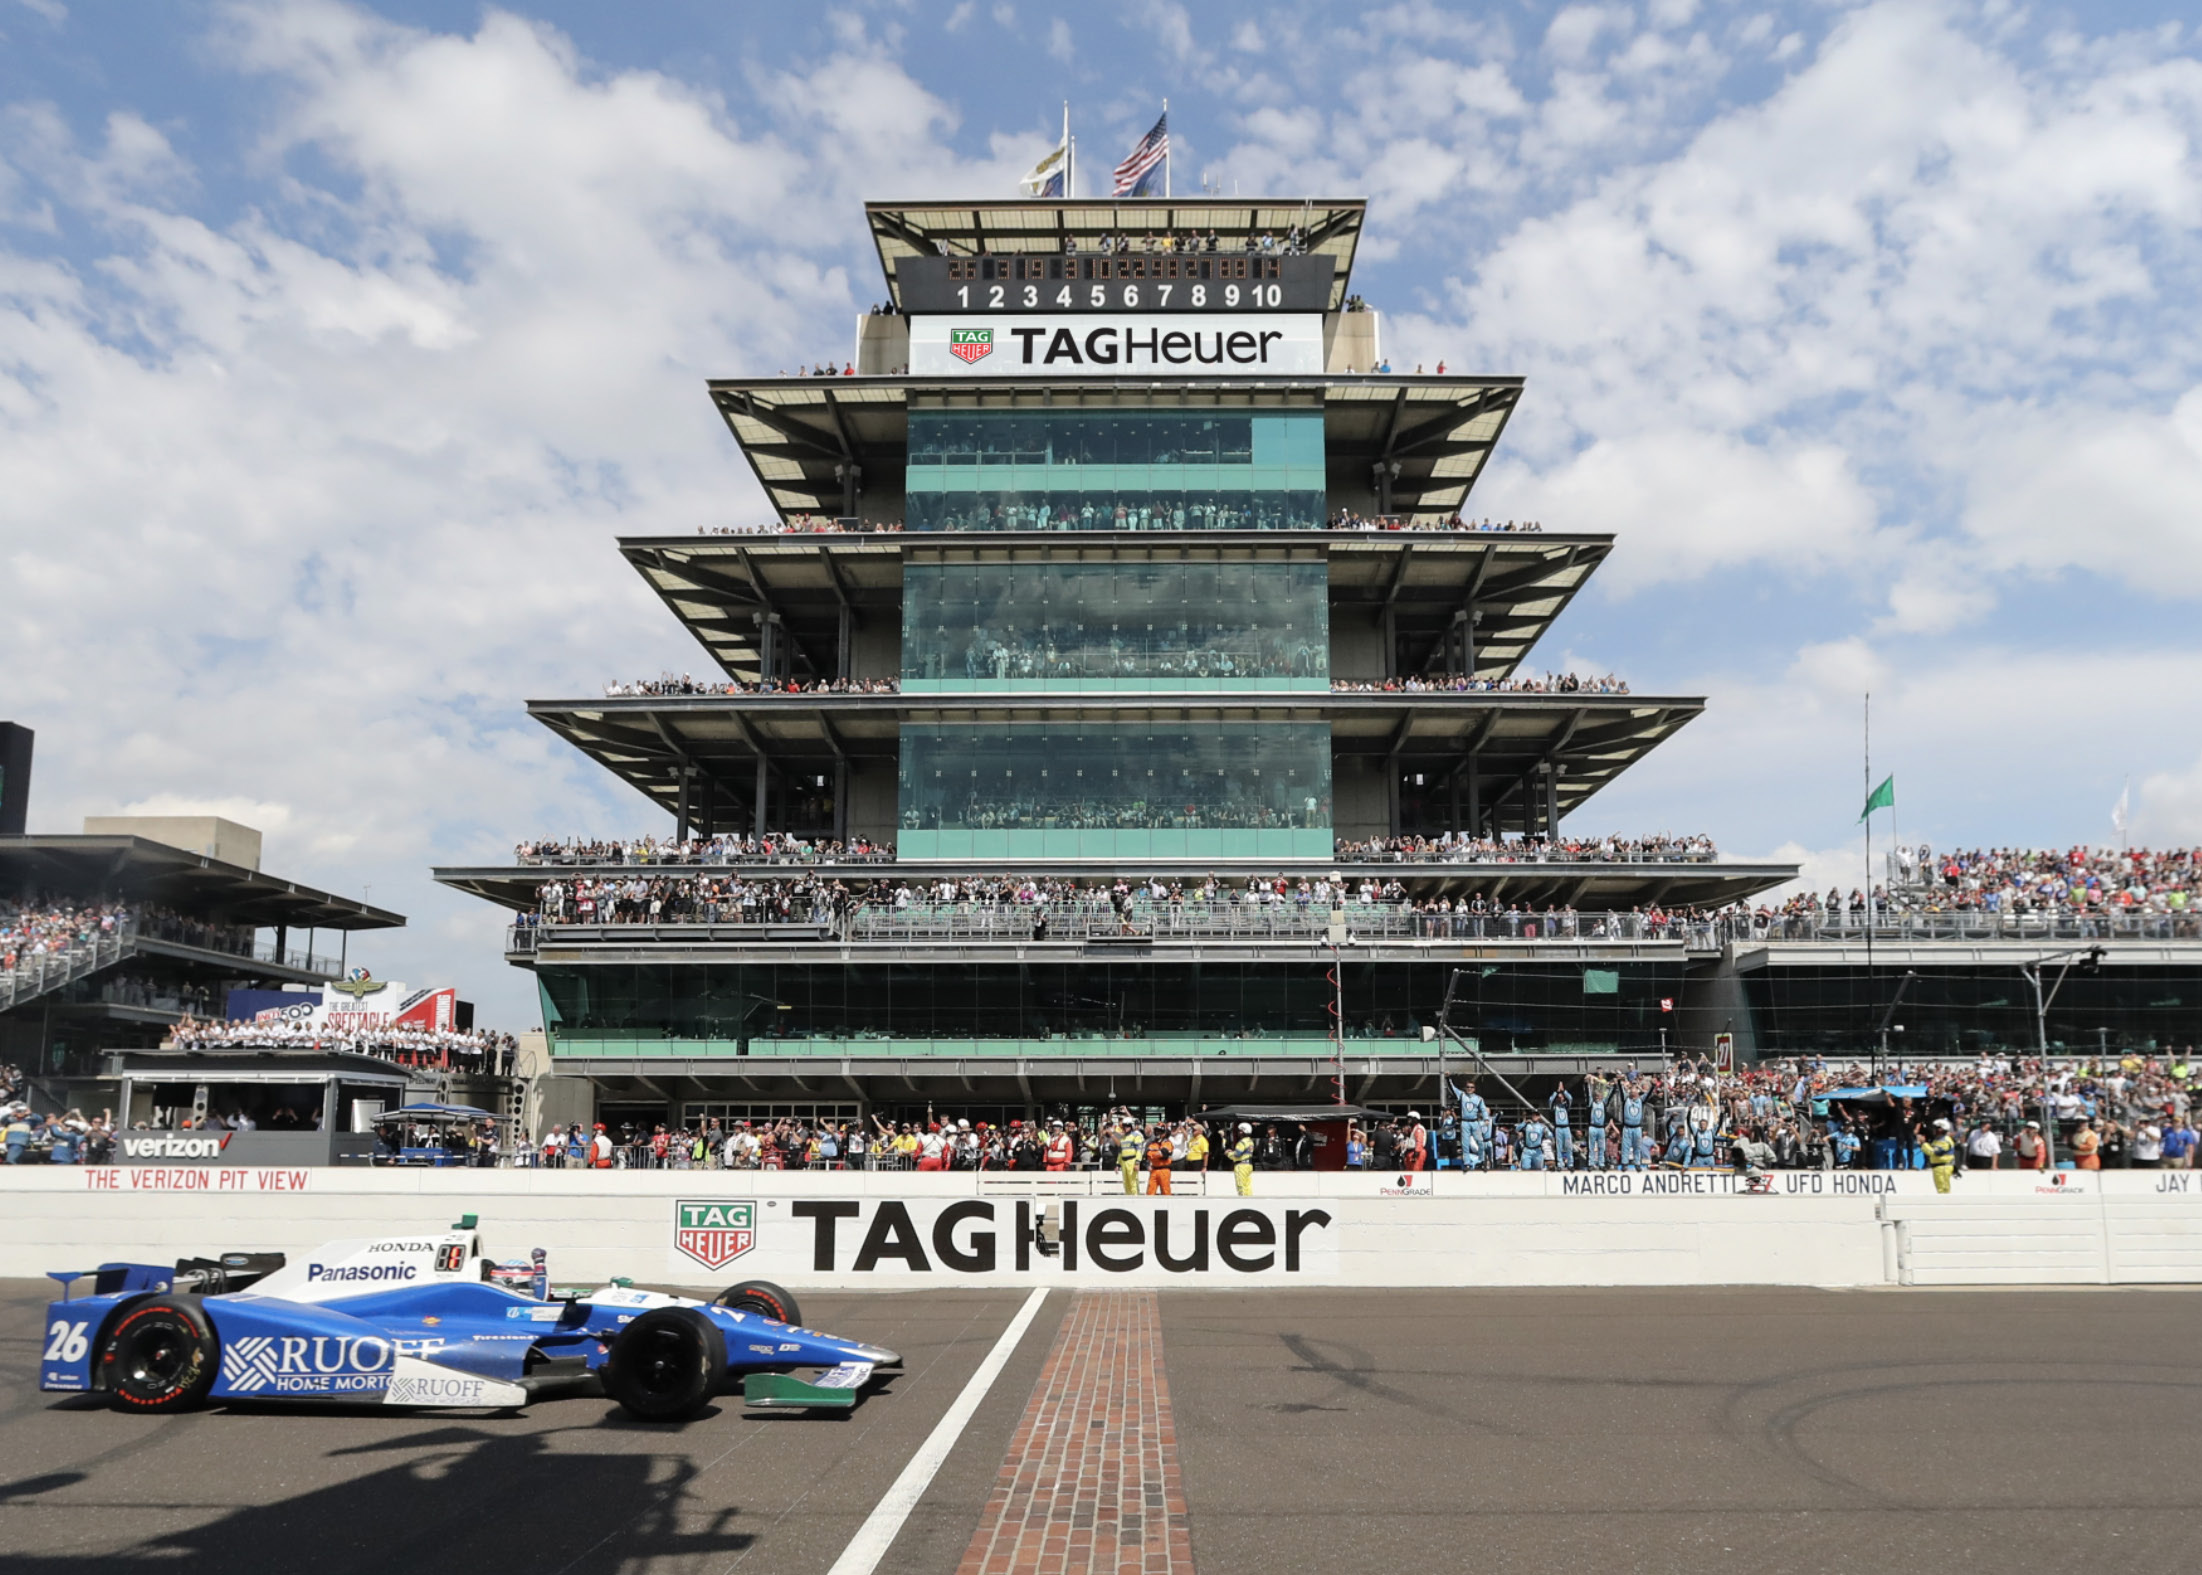 2019 Special-edition Tag Heuer Indy 500 watch